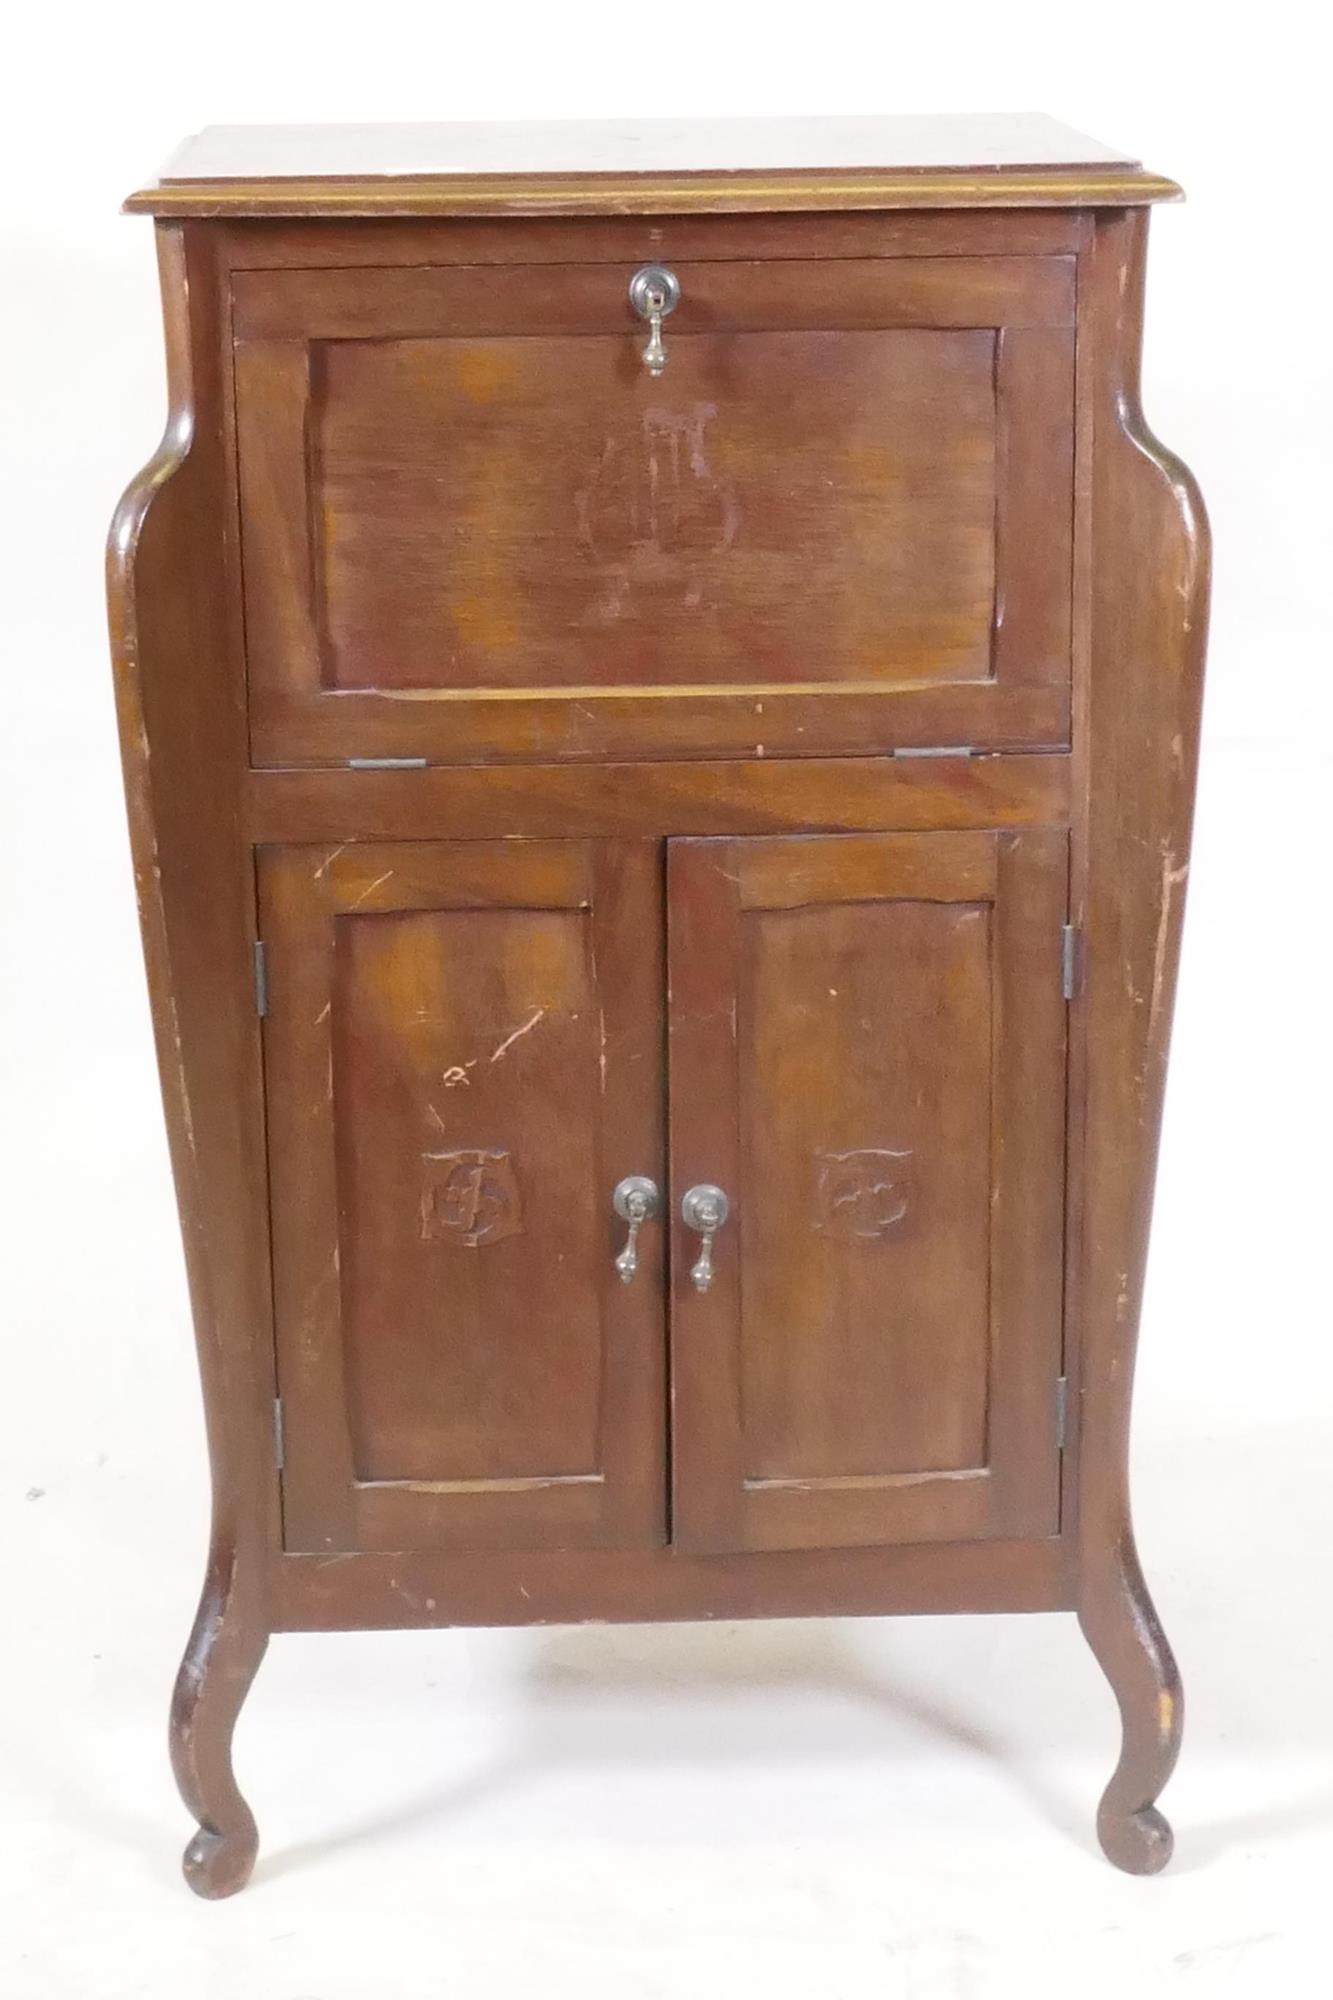 An early C20th Art Nouveau style mahogany music cabinet, with fall front and two cupboards, 55 x - Image 2 of 3